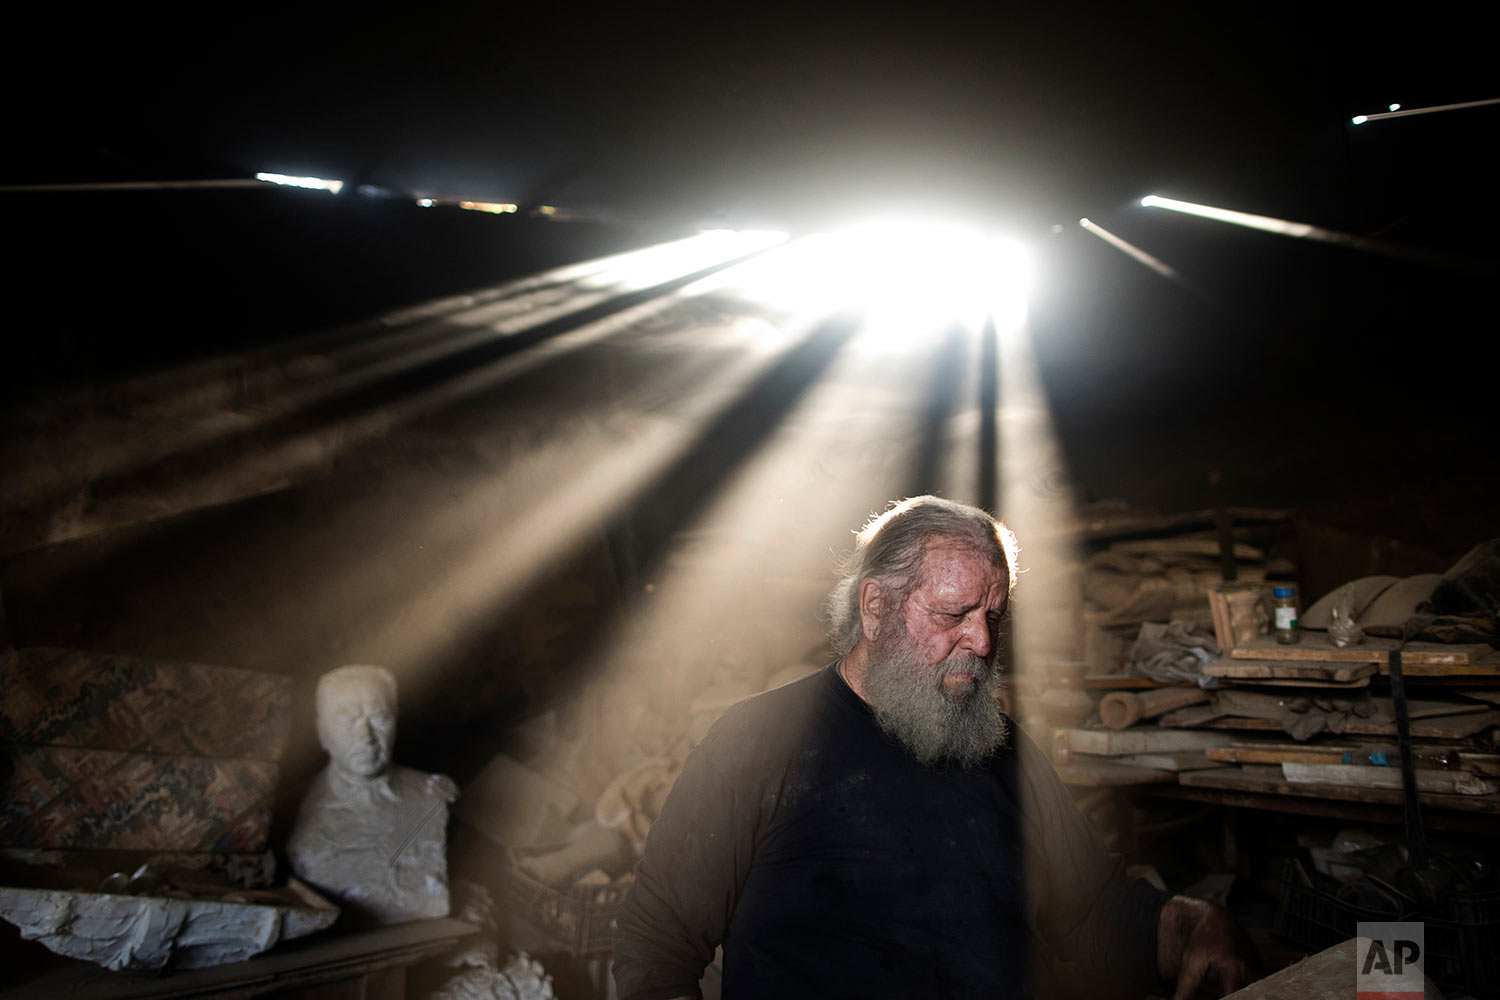  In this Friday, Nov. 20, 2017 photo, rays of sunlight shine on sculptor and ceramicist Haralambos Goumas as he works in his workshop, in the Egaleo suburb of Athens. (AP Photo/Petros Giannakouris) 